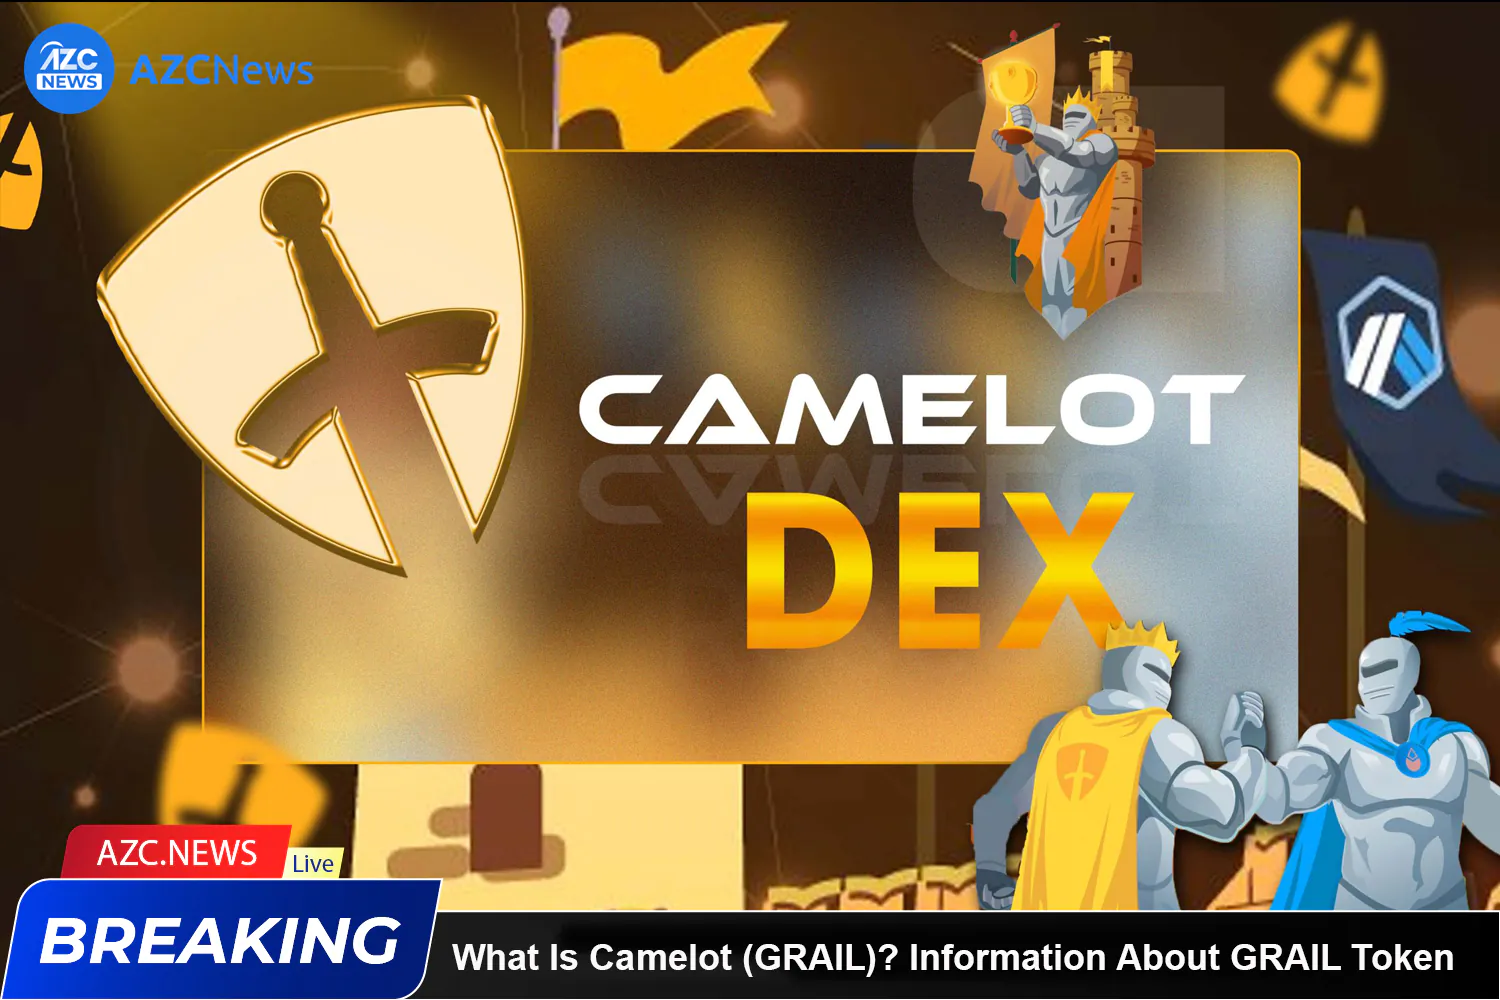 What Is Camelot (grail)